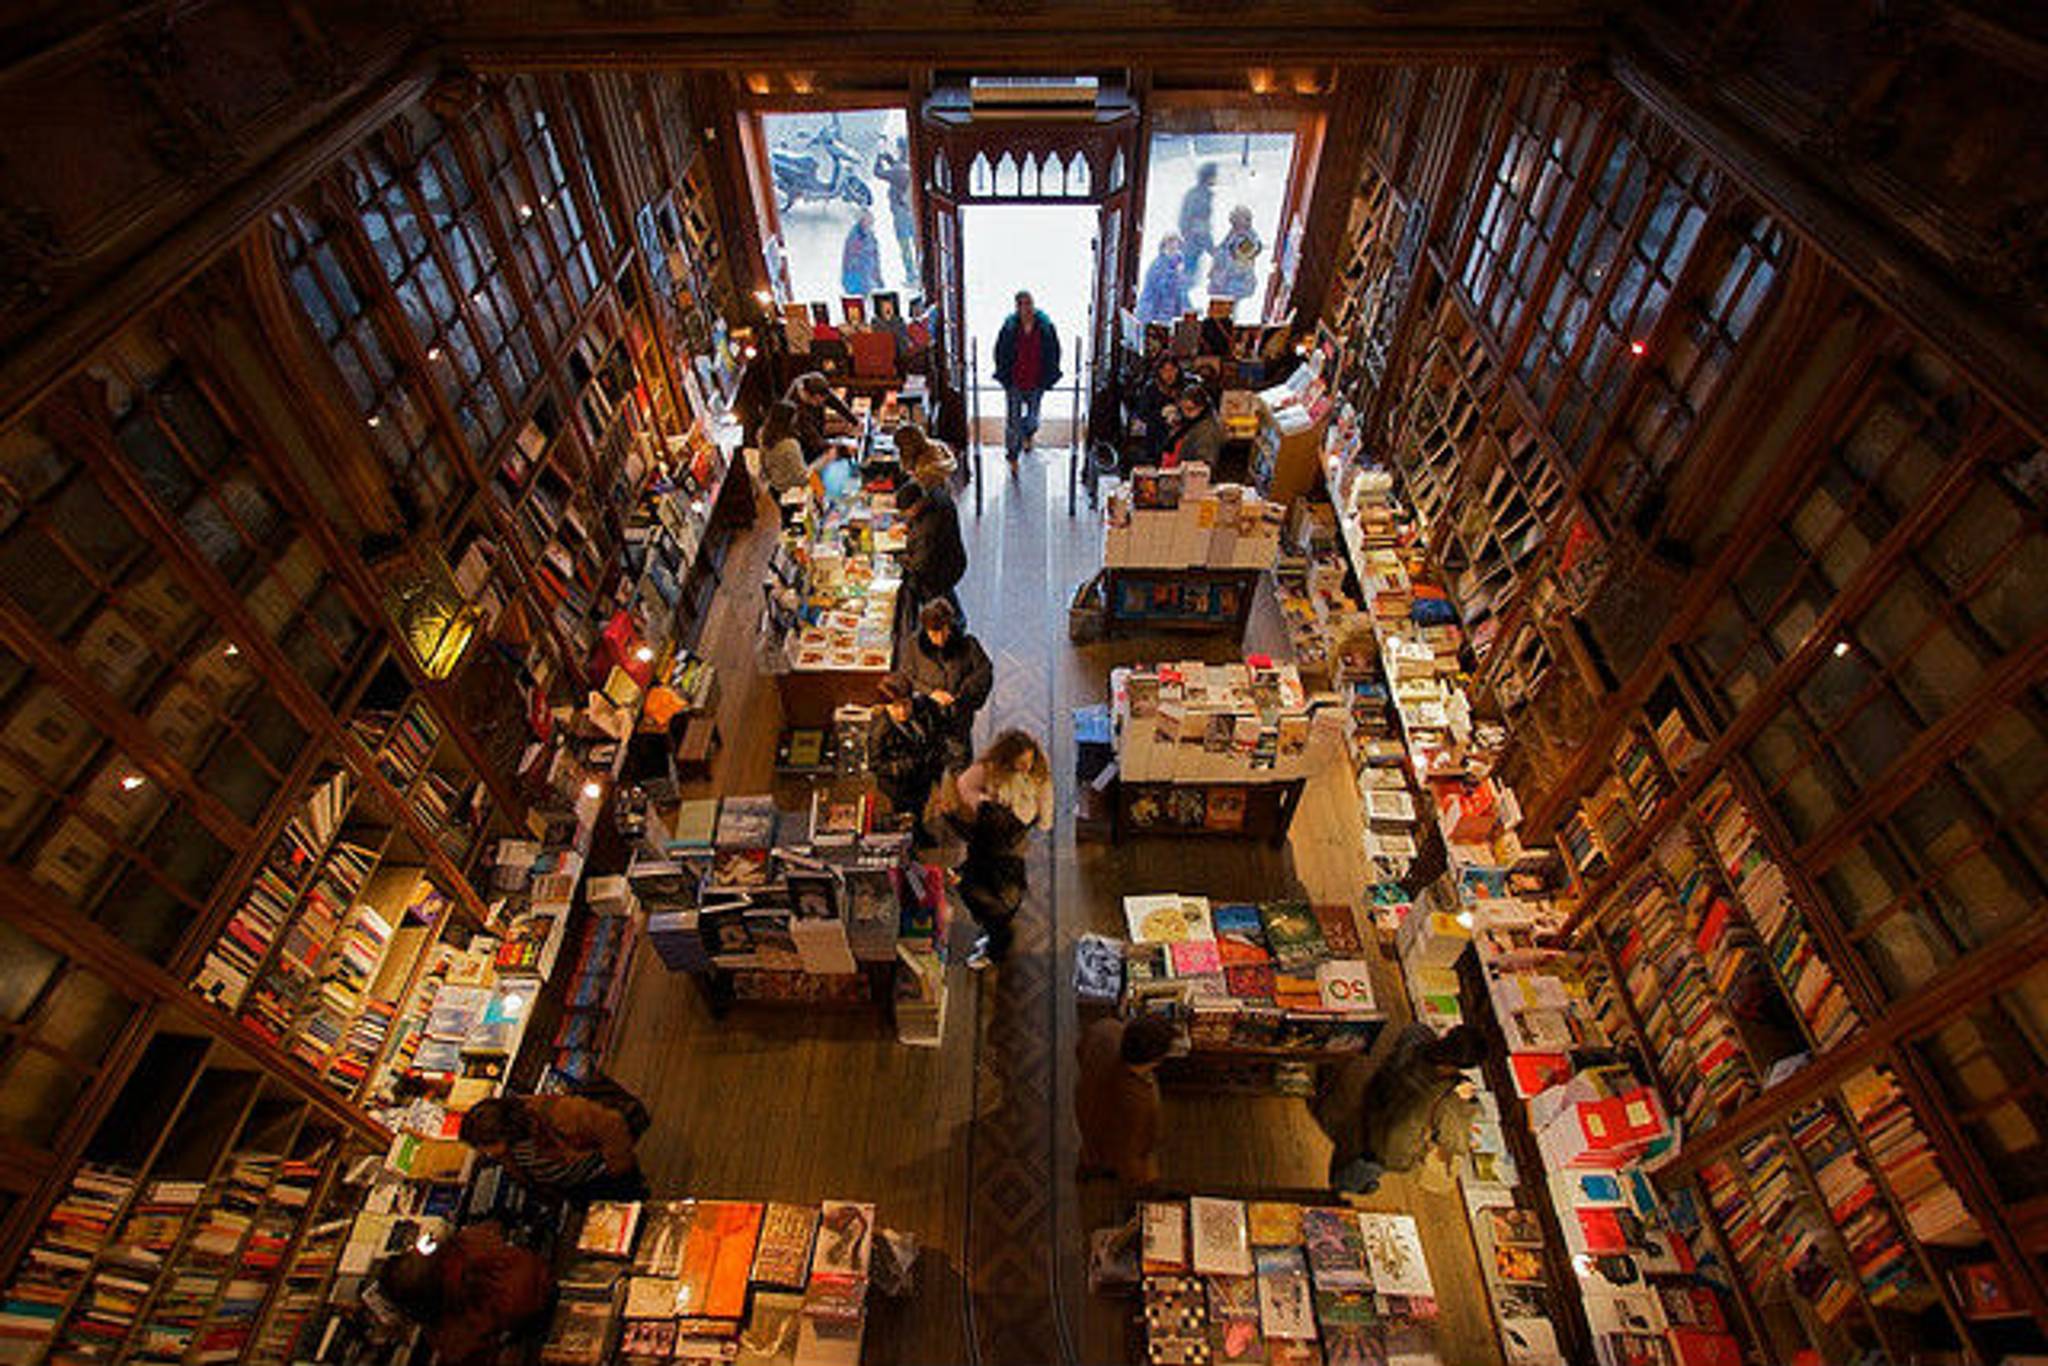 Independent bookstores making a quiet comeback